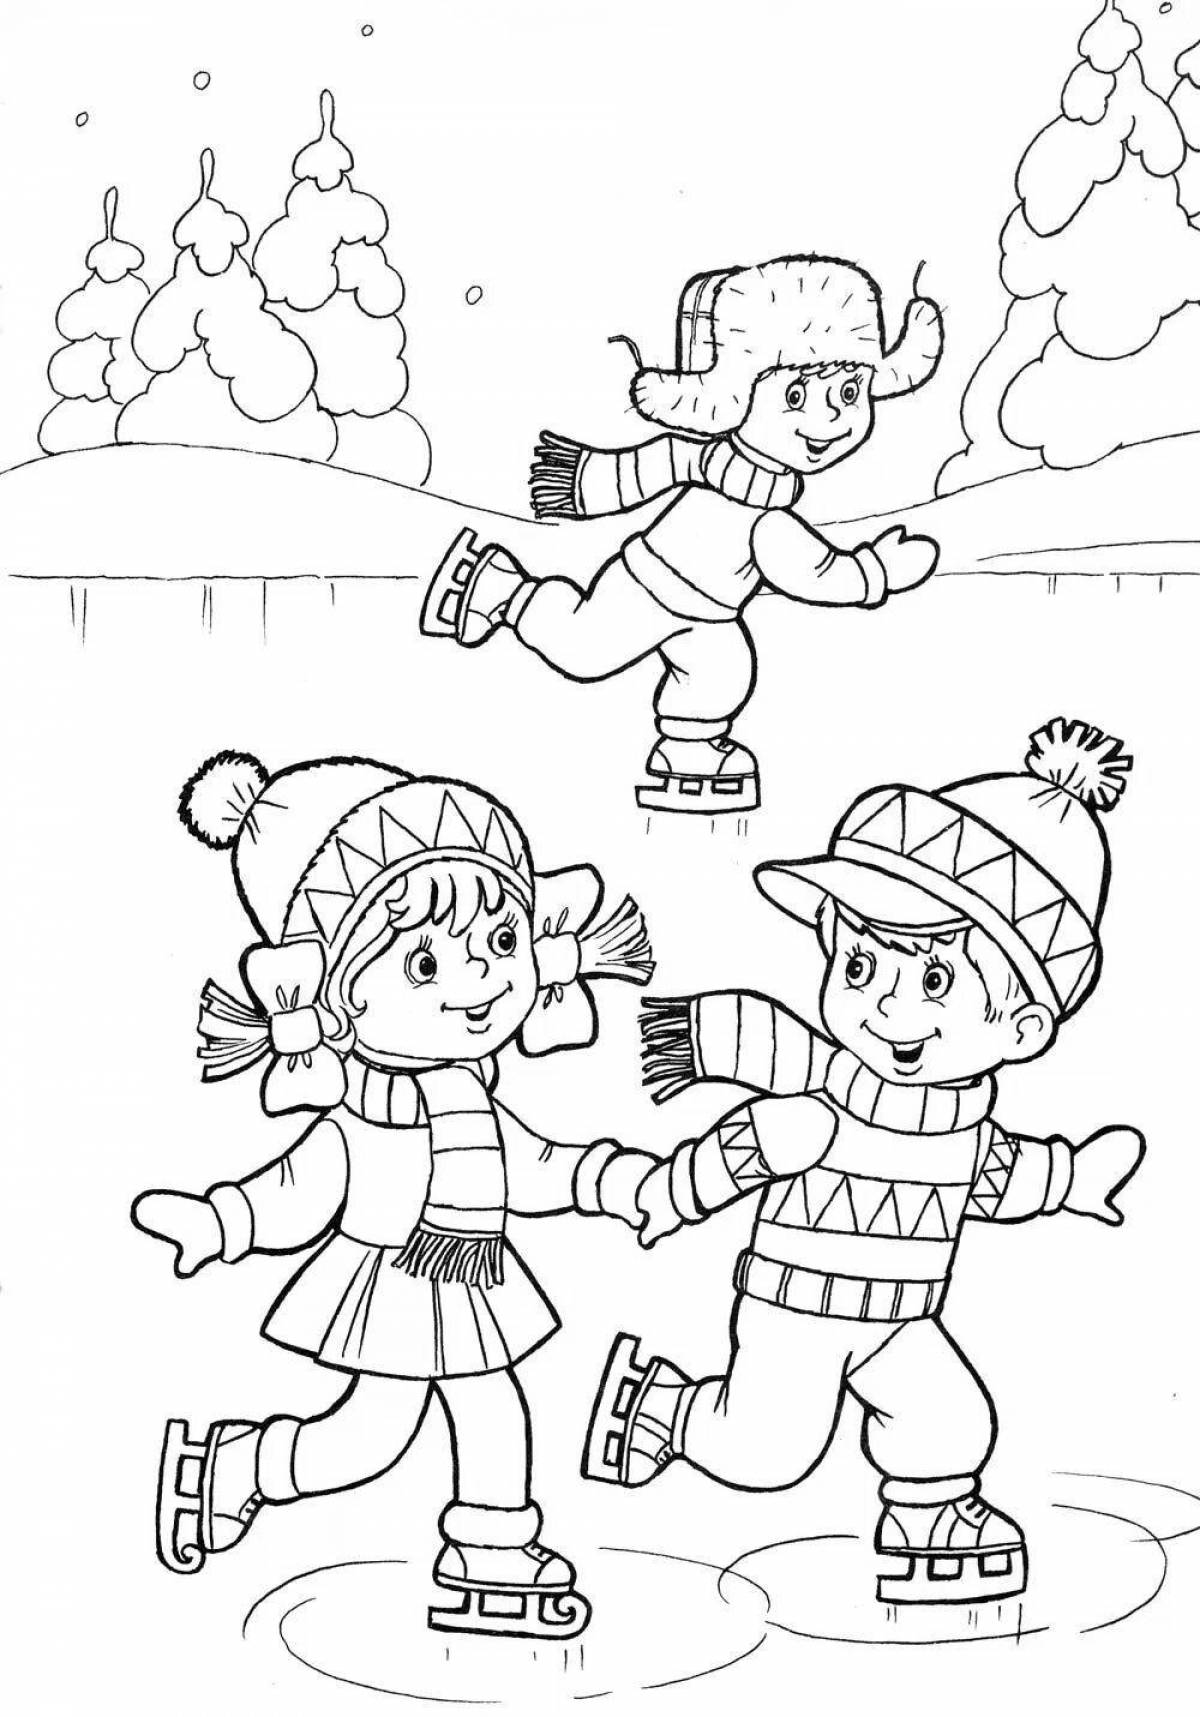 Inspiring winter coloring book for 6 year olds